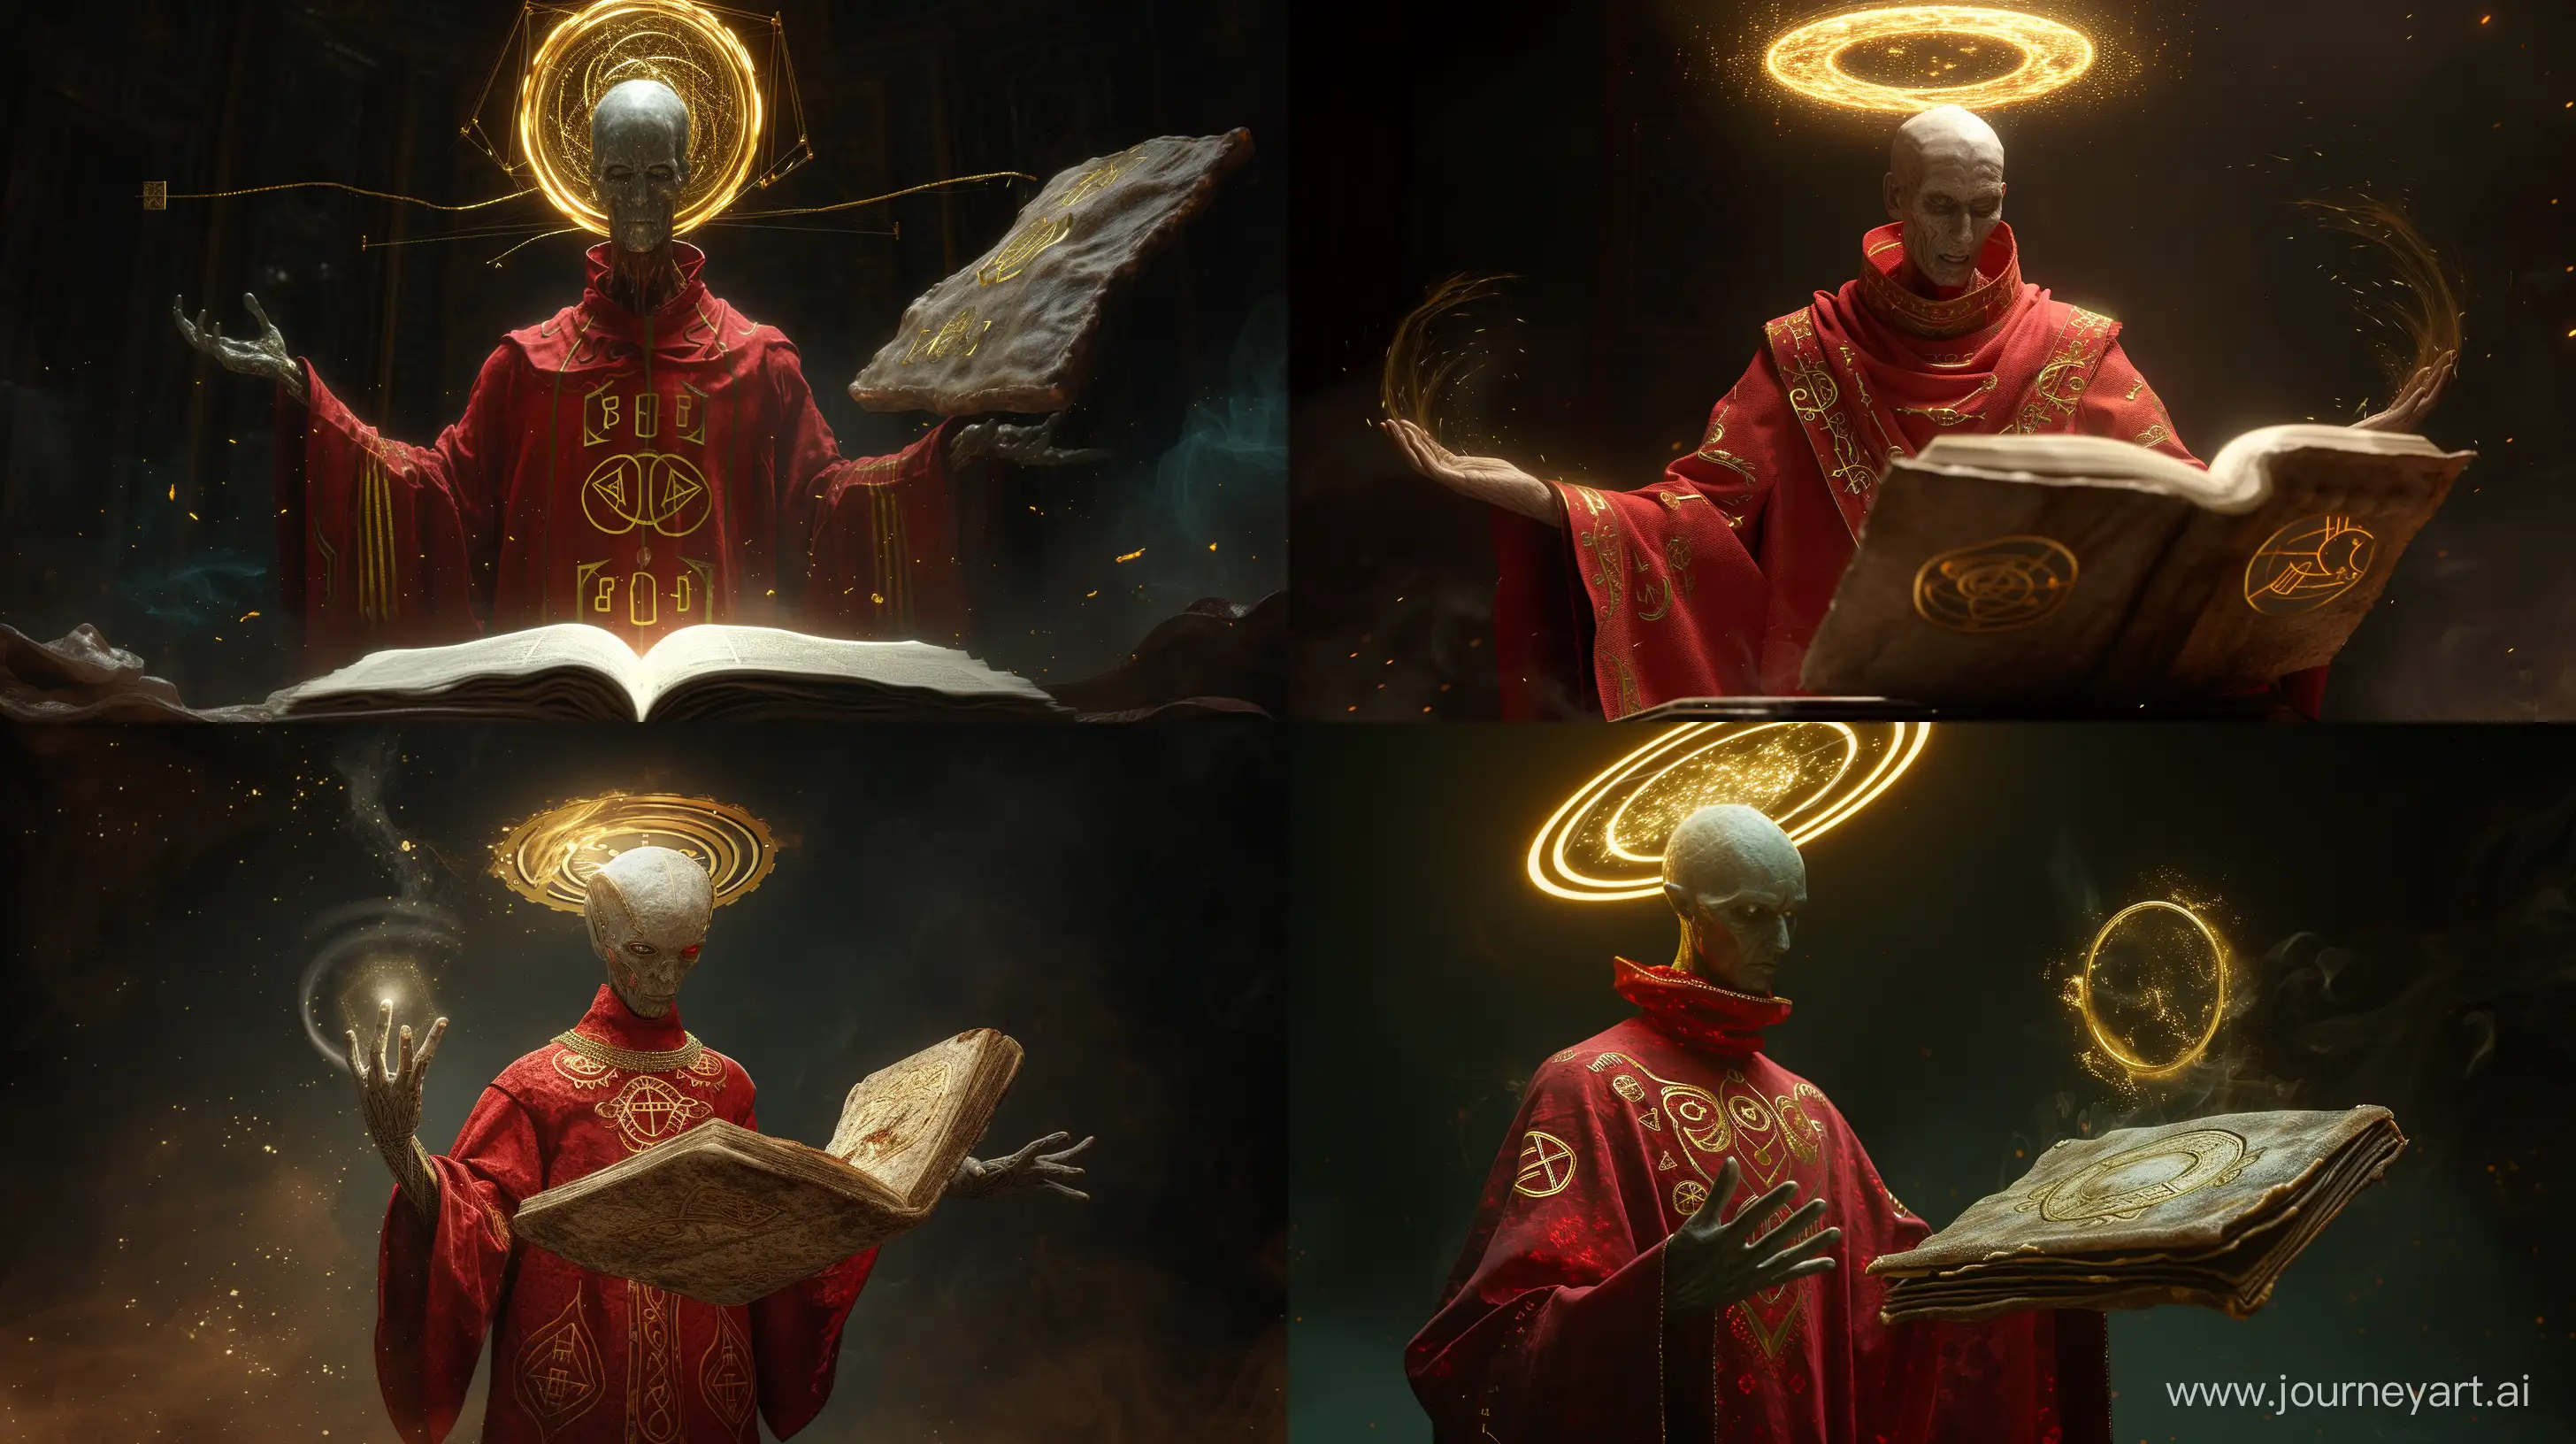 a futuristic-sorcerer, with elongated head and golden circlet hovering above, wearing a red robe with arcane symbols of gold etched.
the sorcerer is conjuring up a spell from a floating, old skin-bound open book, dramatic lighting, highly detailed --ar 16:9